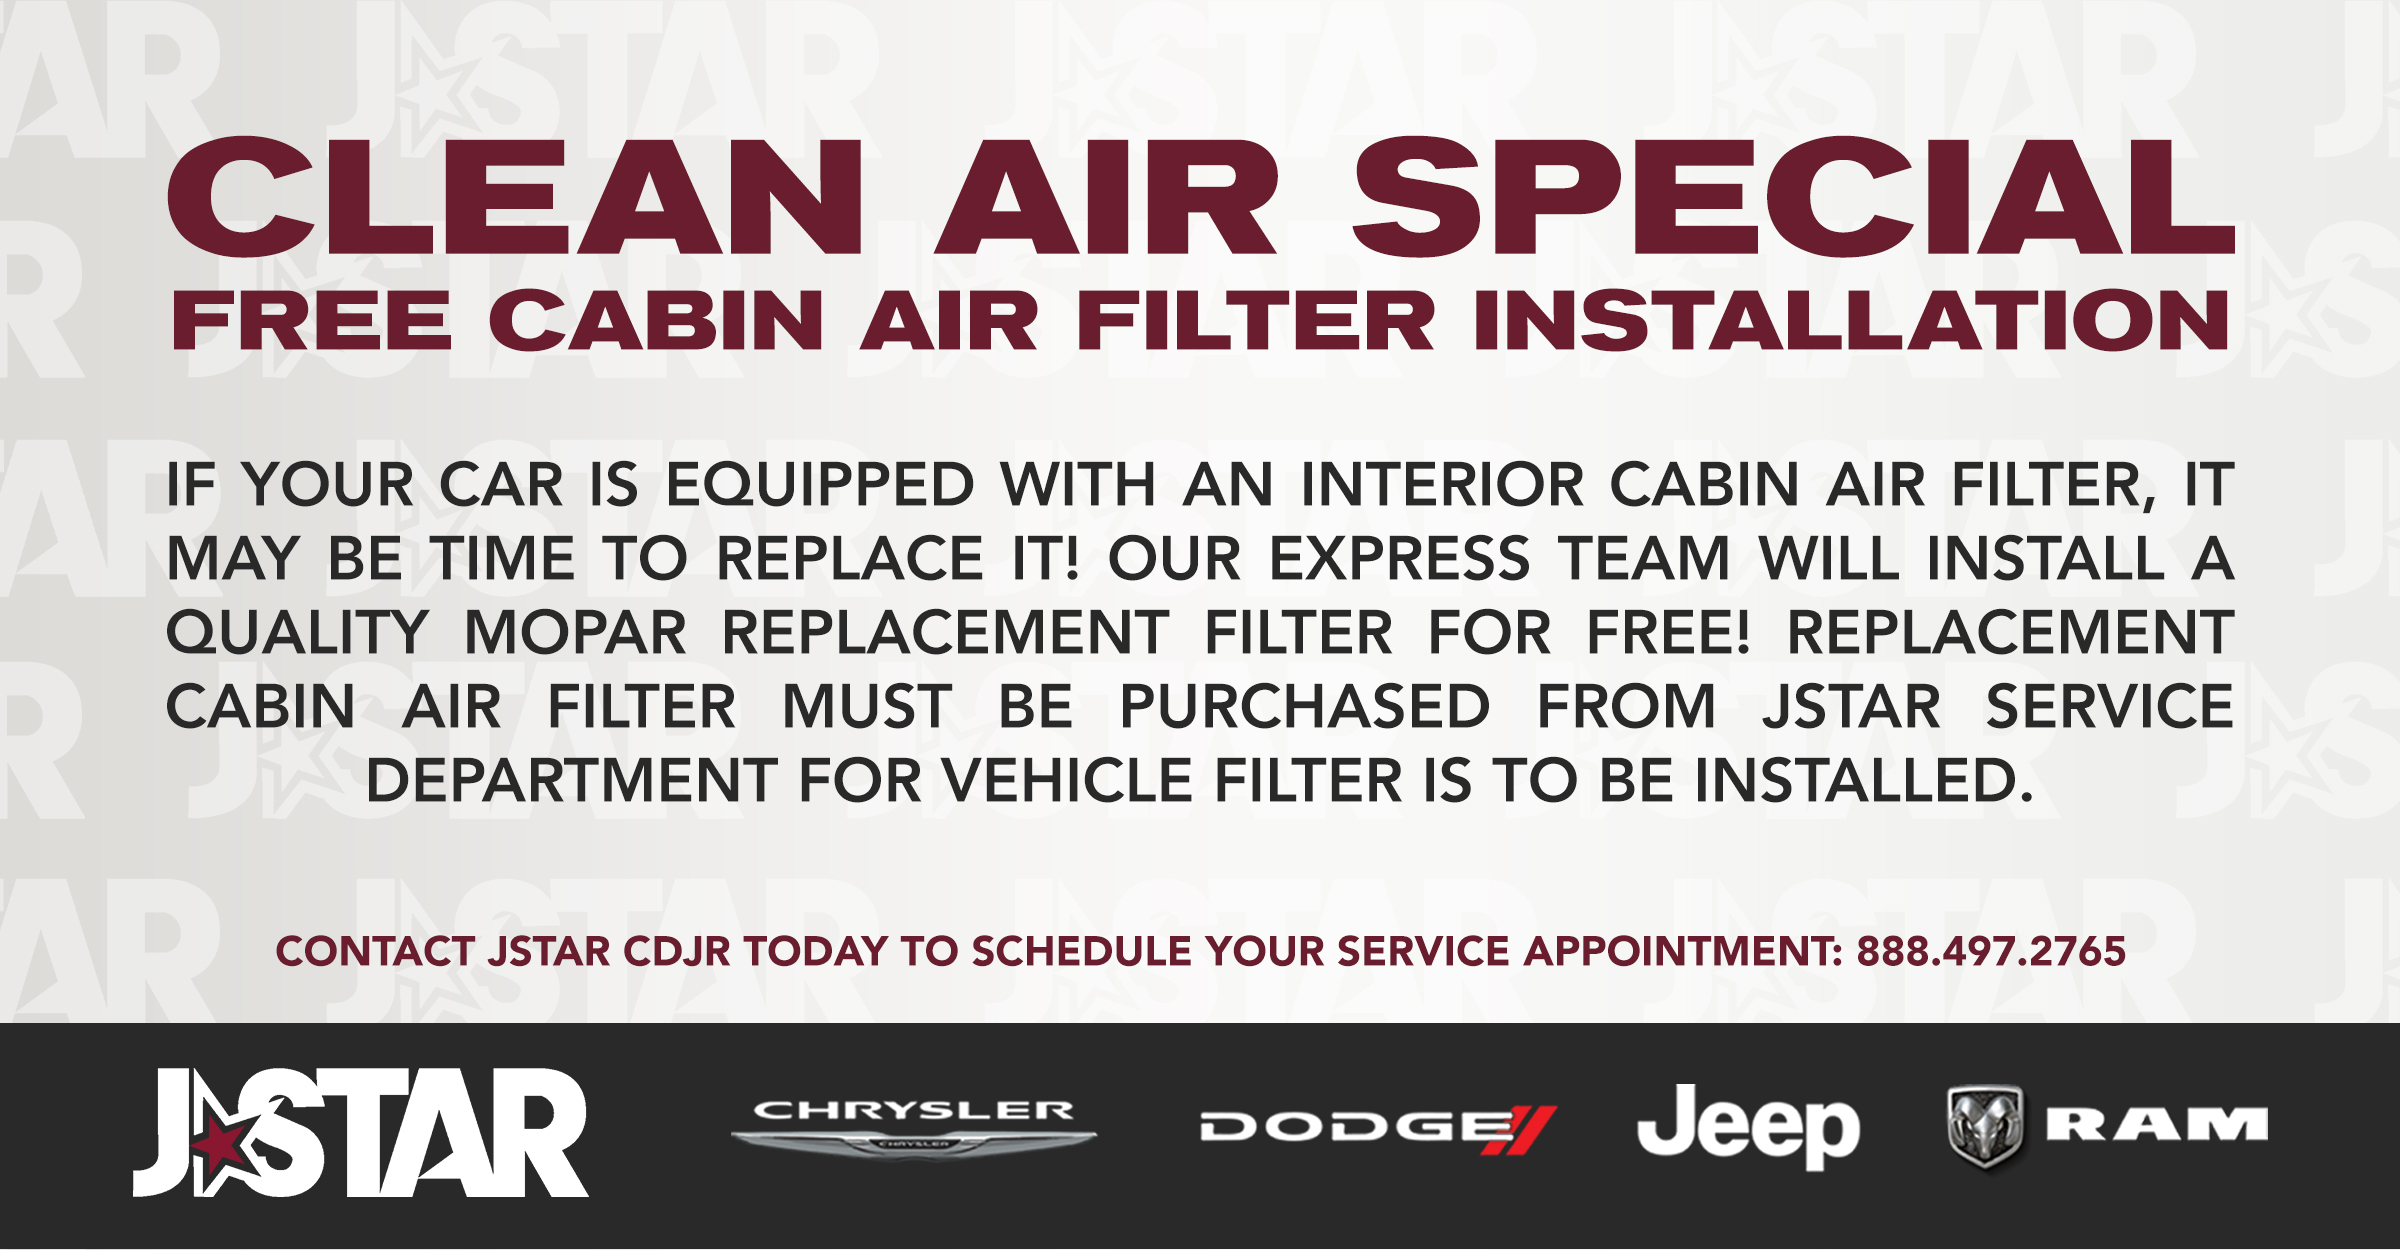 FREE INSTALLATION OF CABIN AIR FILTER